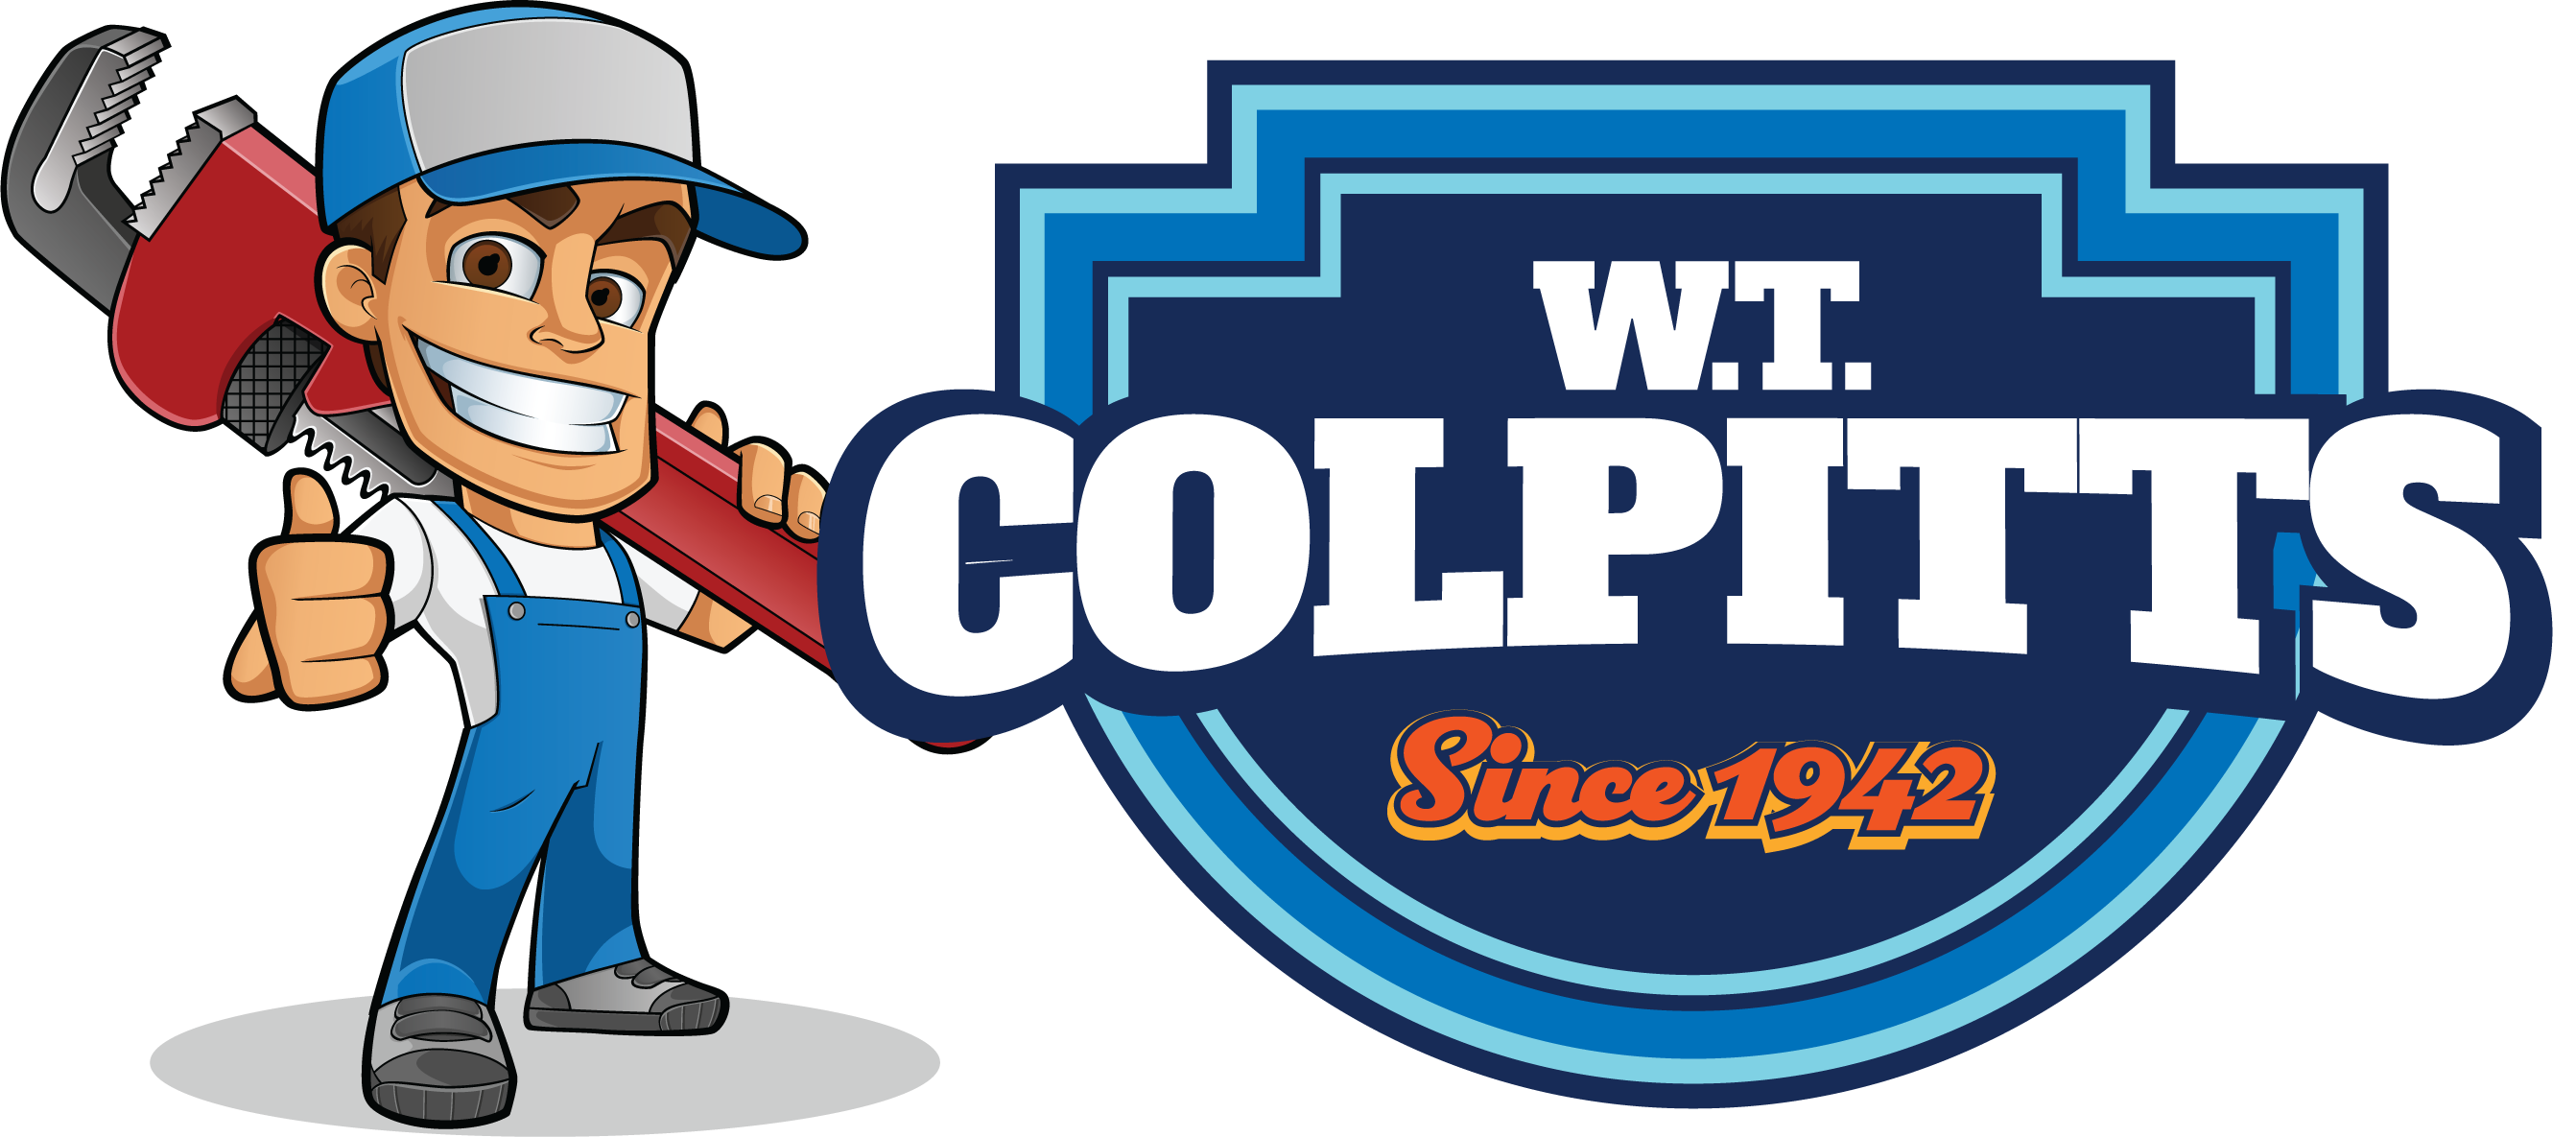 W.T. Colpitts, Inc. Logo